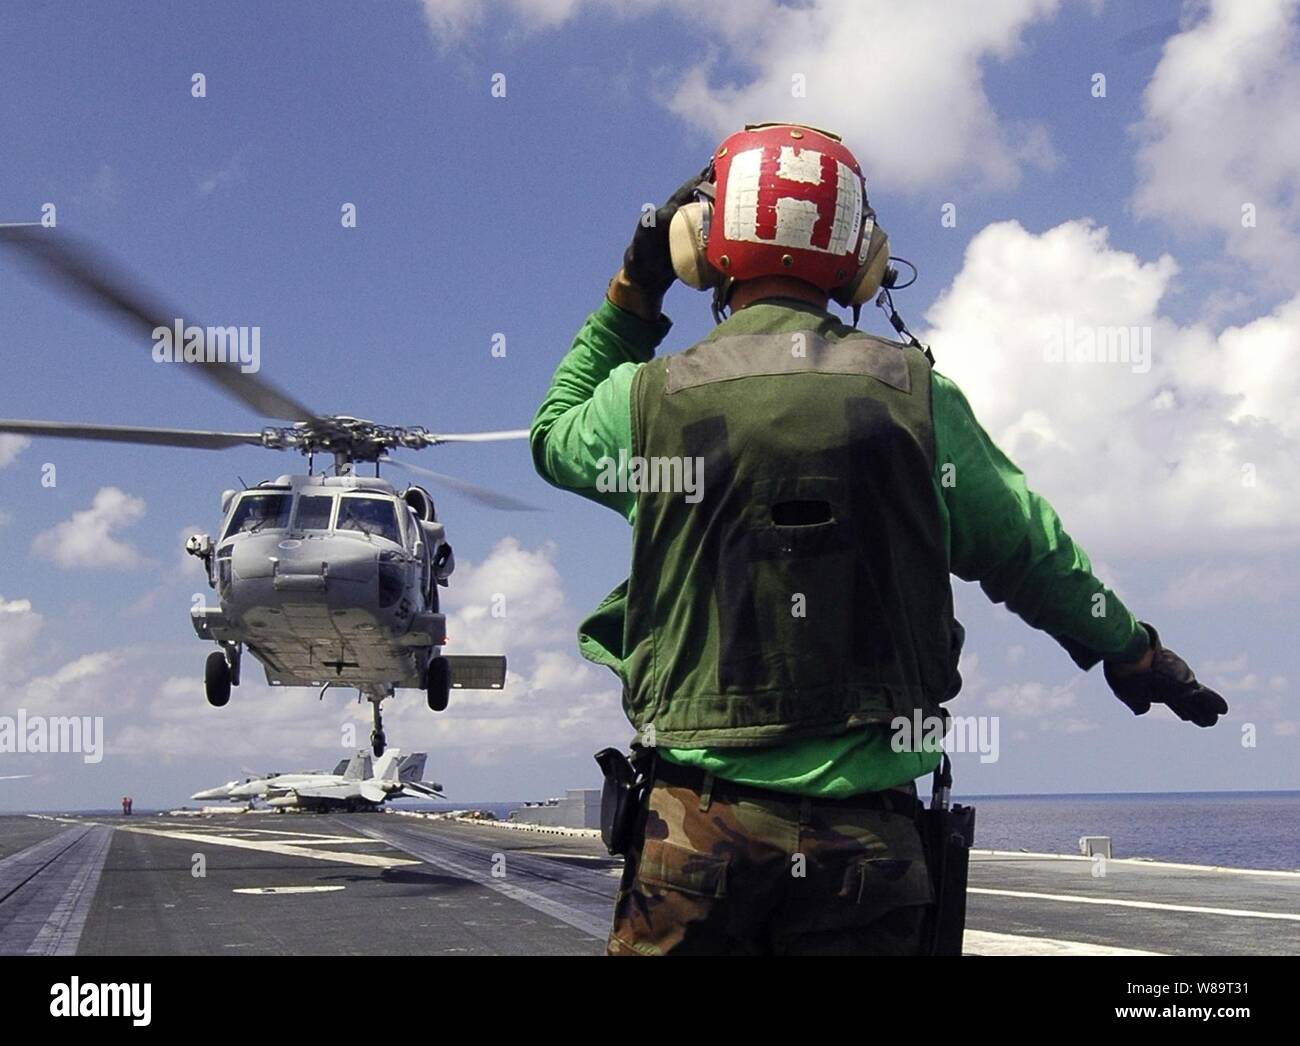 A U.S. Navy sailor guides an MH-60 Knighthawk onto the flight deck of the aircraft carrier USS Abraham Lincoln (CVN 72) during a vertical replenishment operation with the ammunition ship USNS Kiska (T-AE 35) on May 10, 2006.  The Lincoln and embarked Carrier Air Wing 2 are operating in the South China Sea. The Knighthawk is assigned to Helicopter Sea Combat Squadron 25. Stock Photo